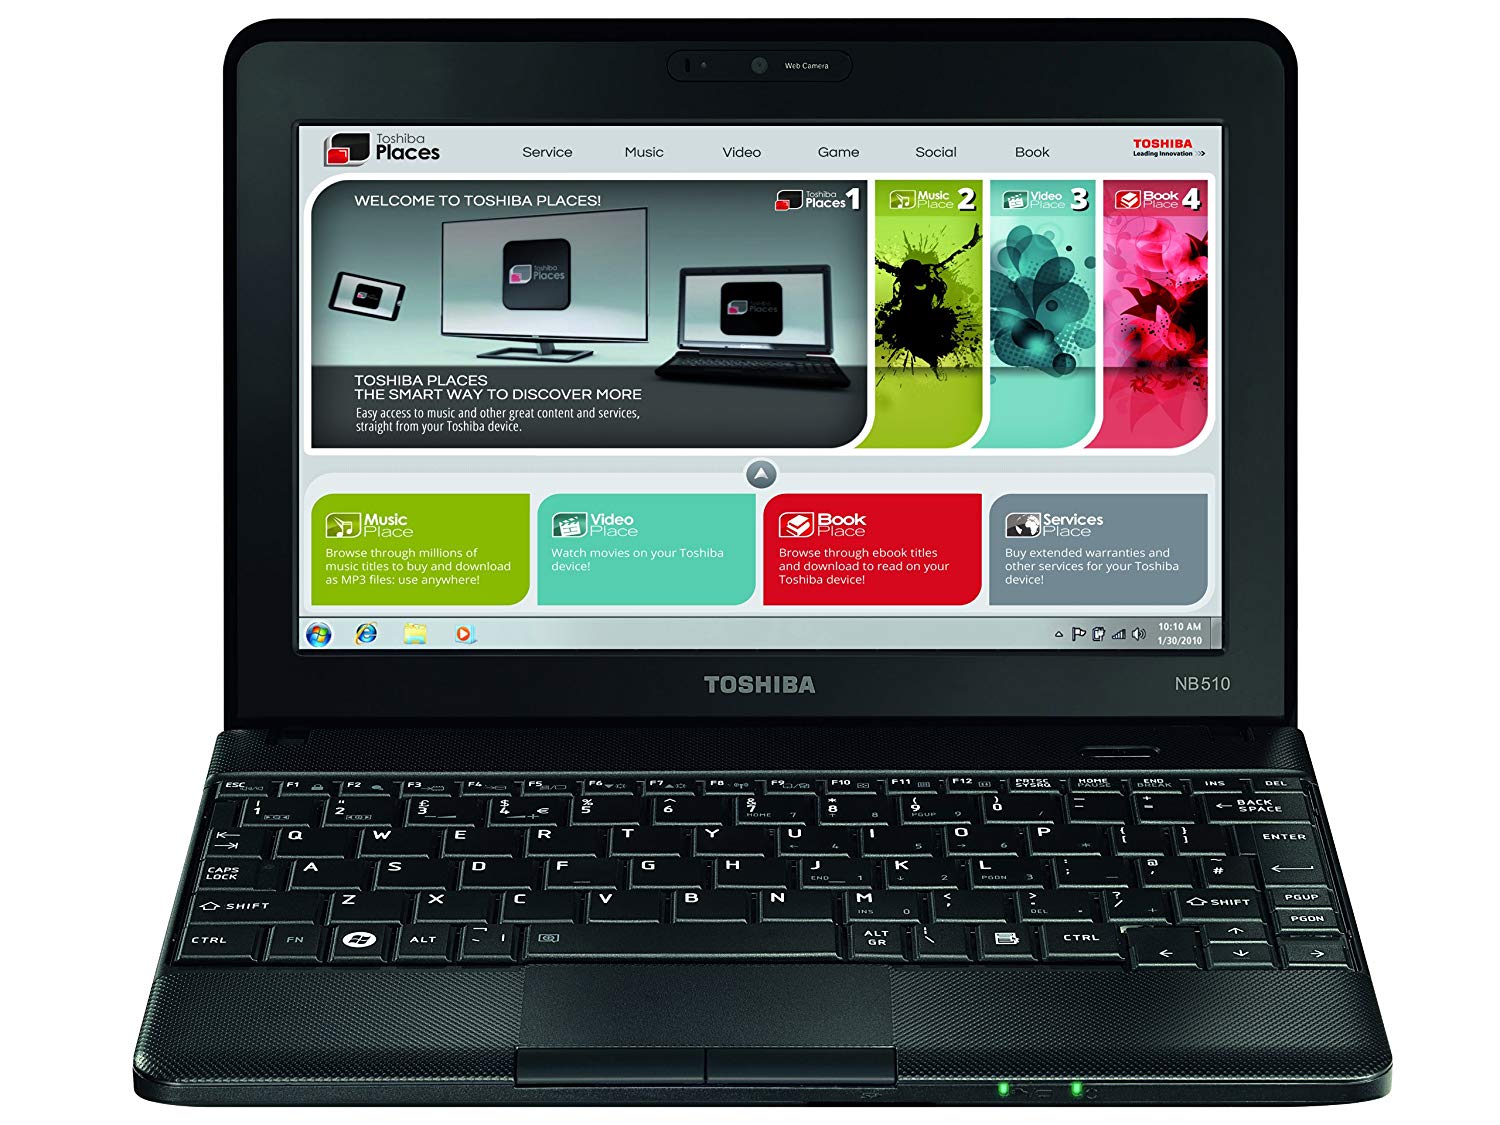 Download Driver Netbook Toshiba Nb510 - roomsfasr